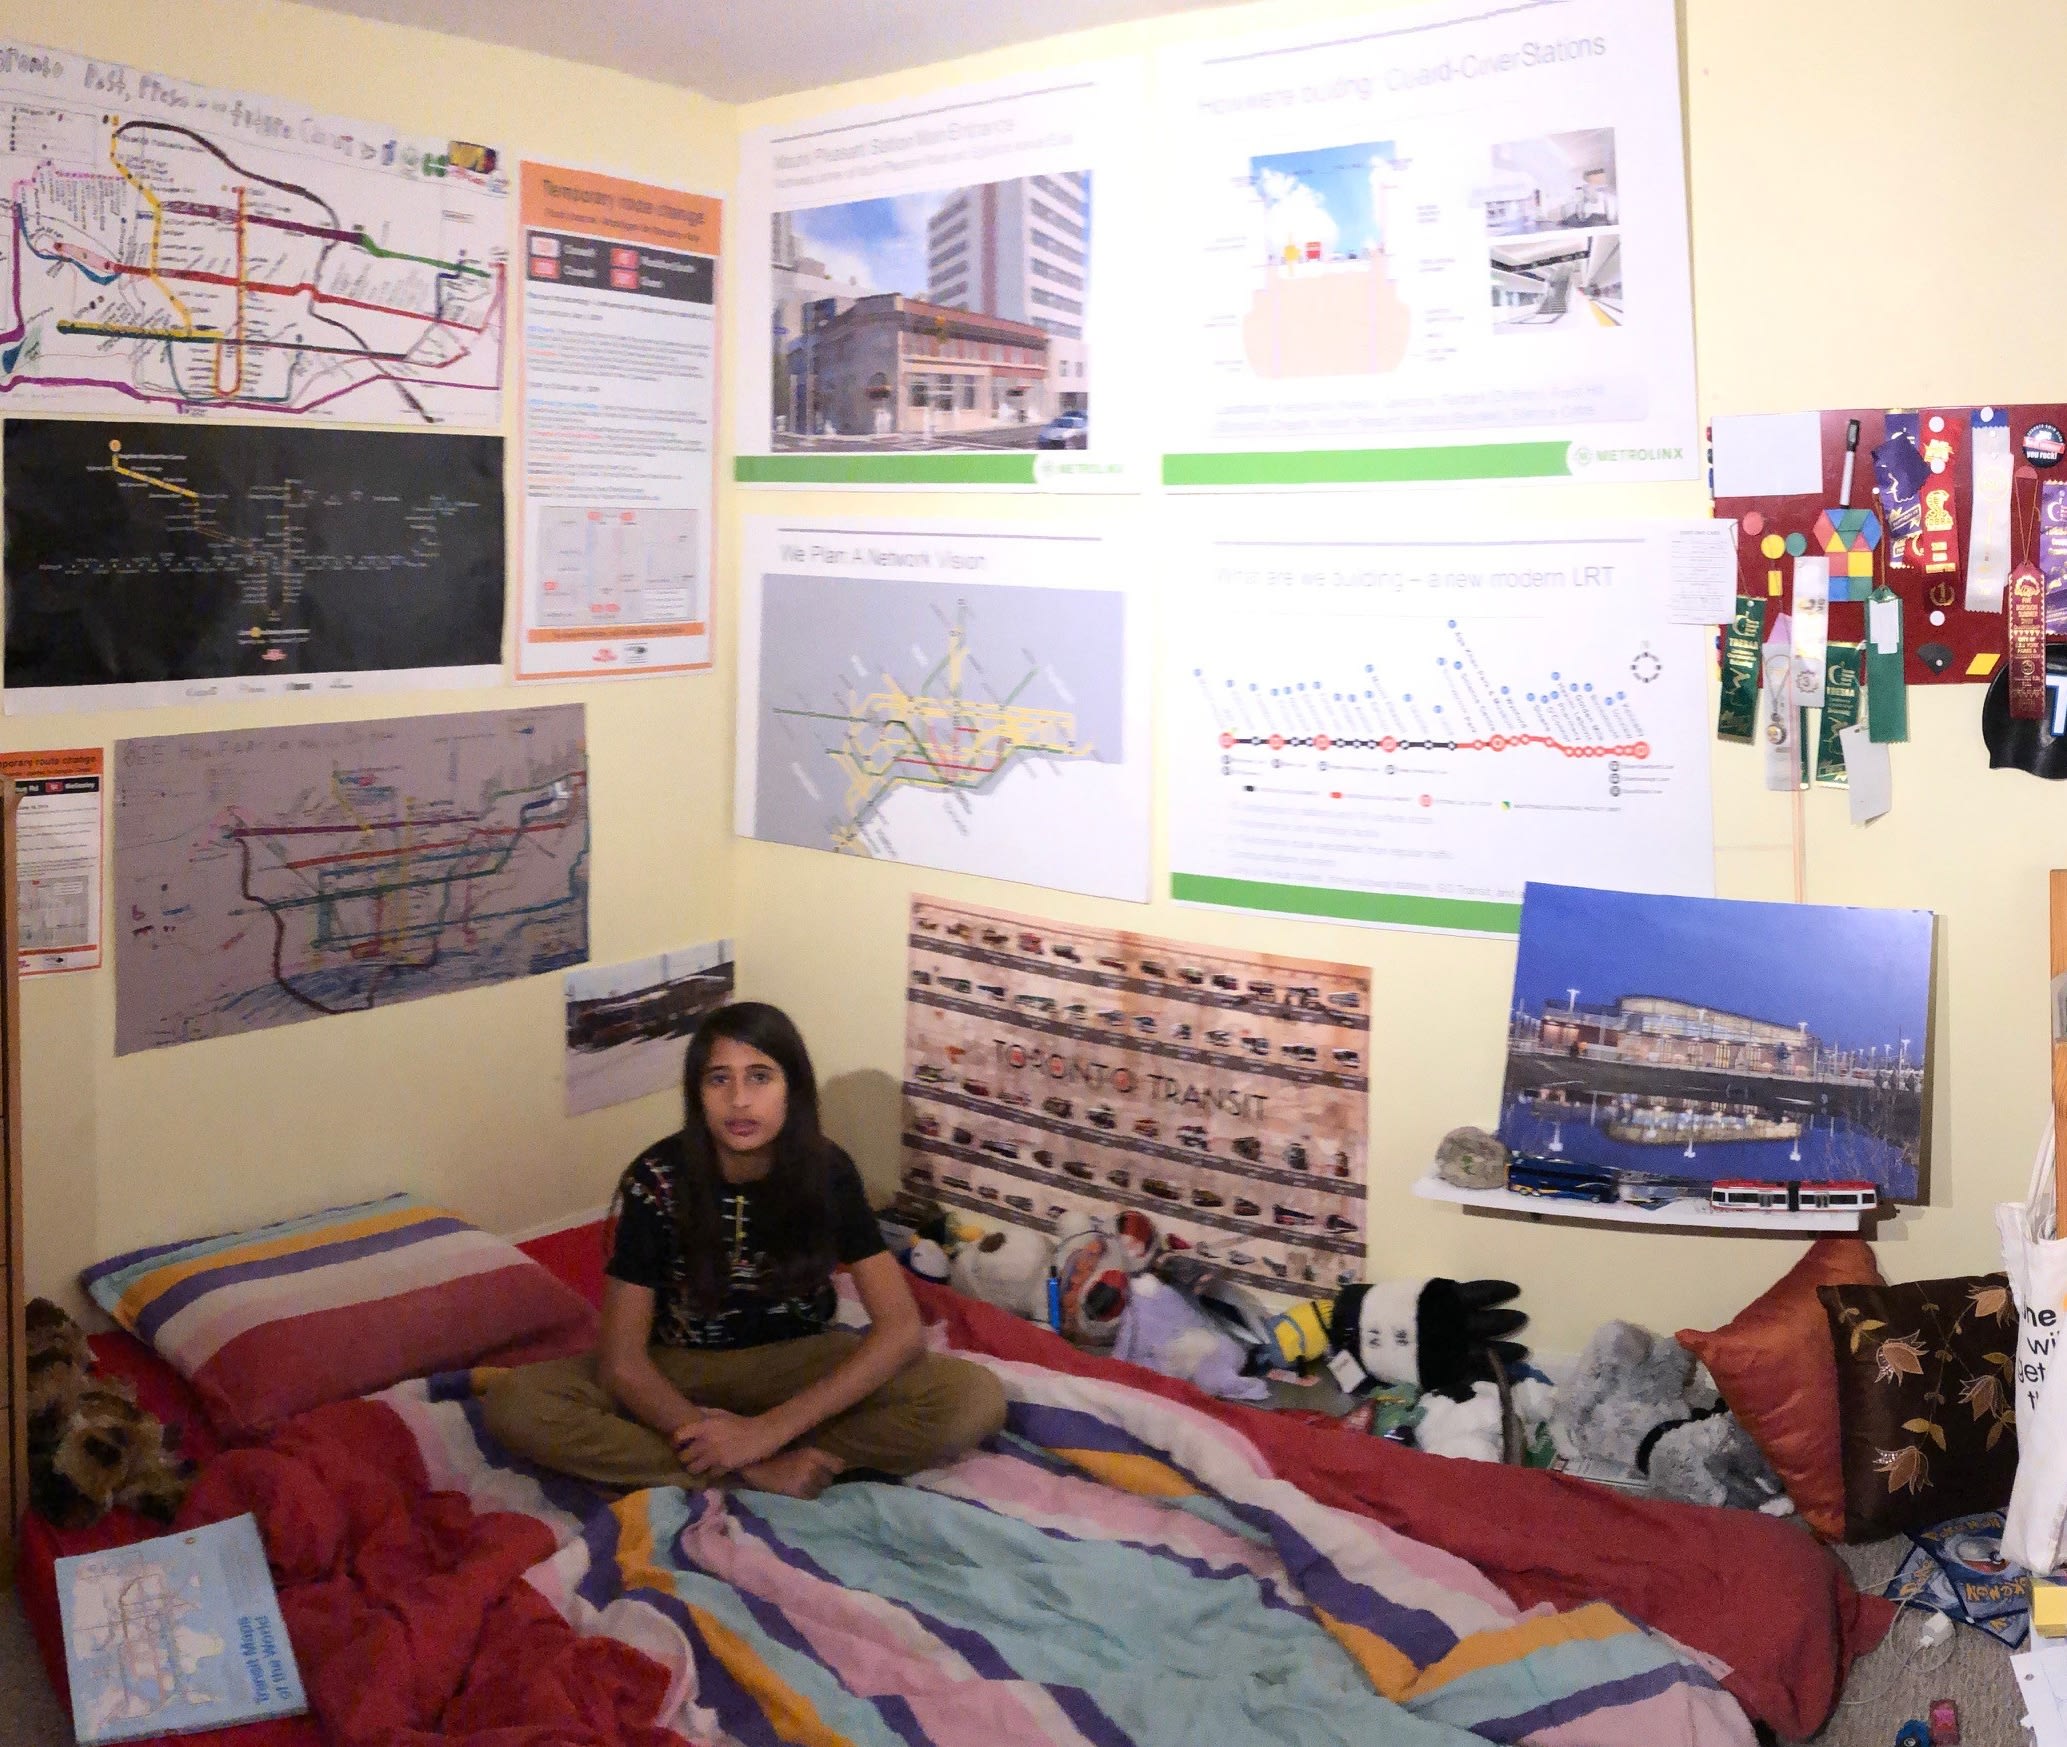 The inside of a bedroom with walls decorated with transit related material.